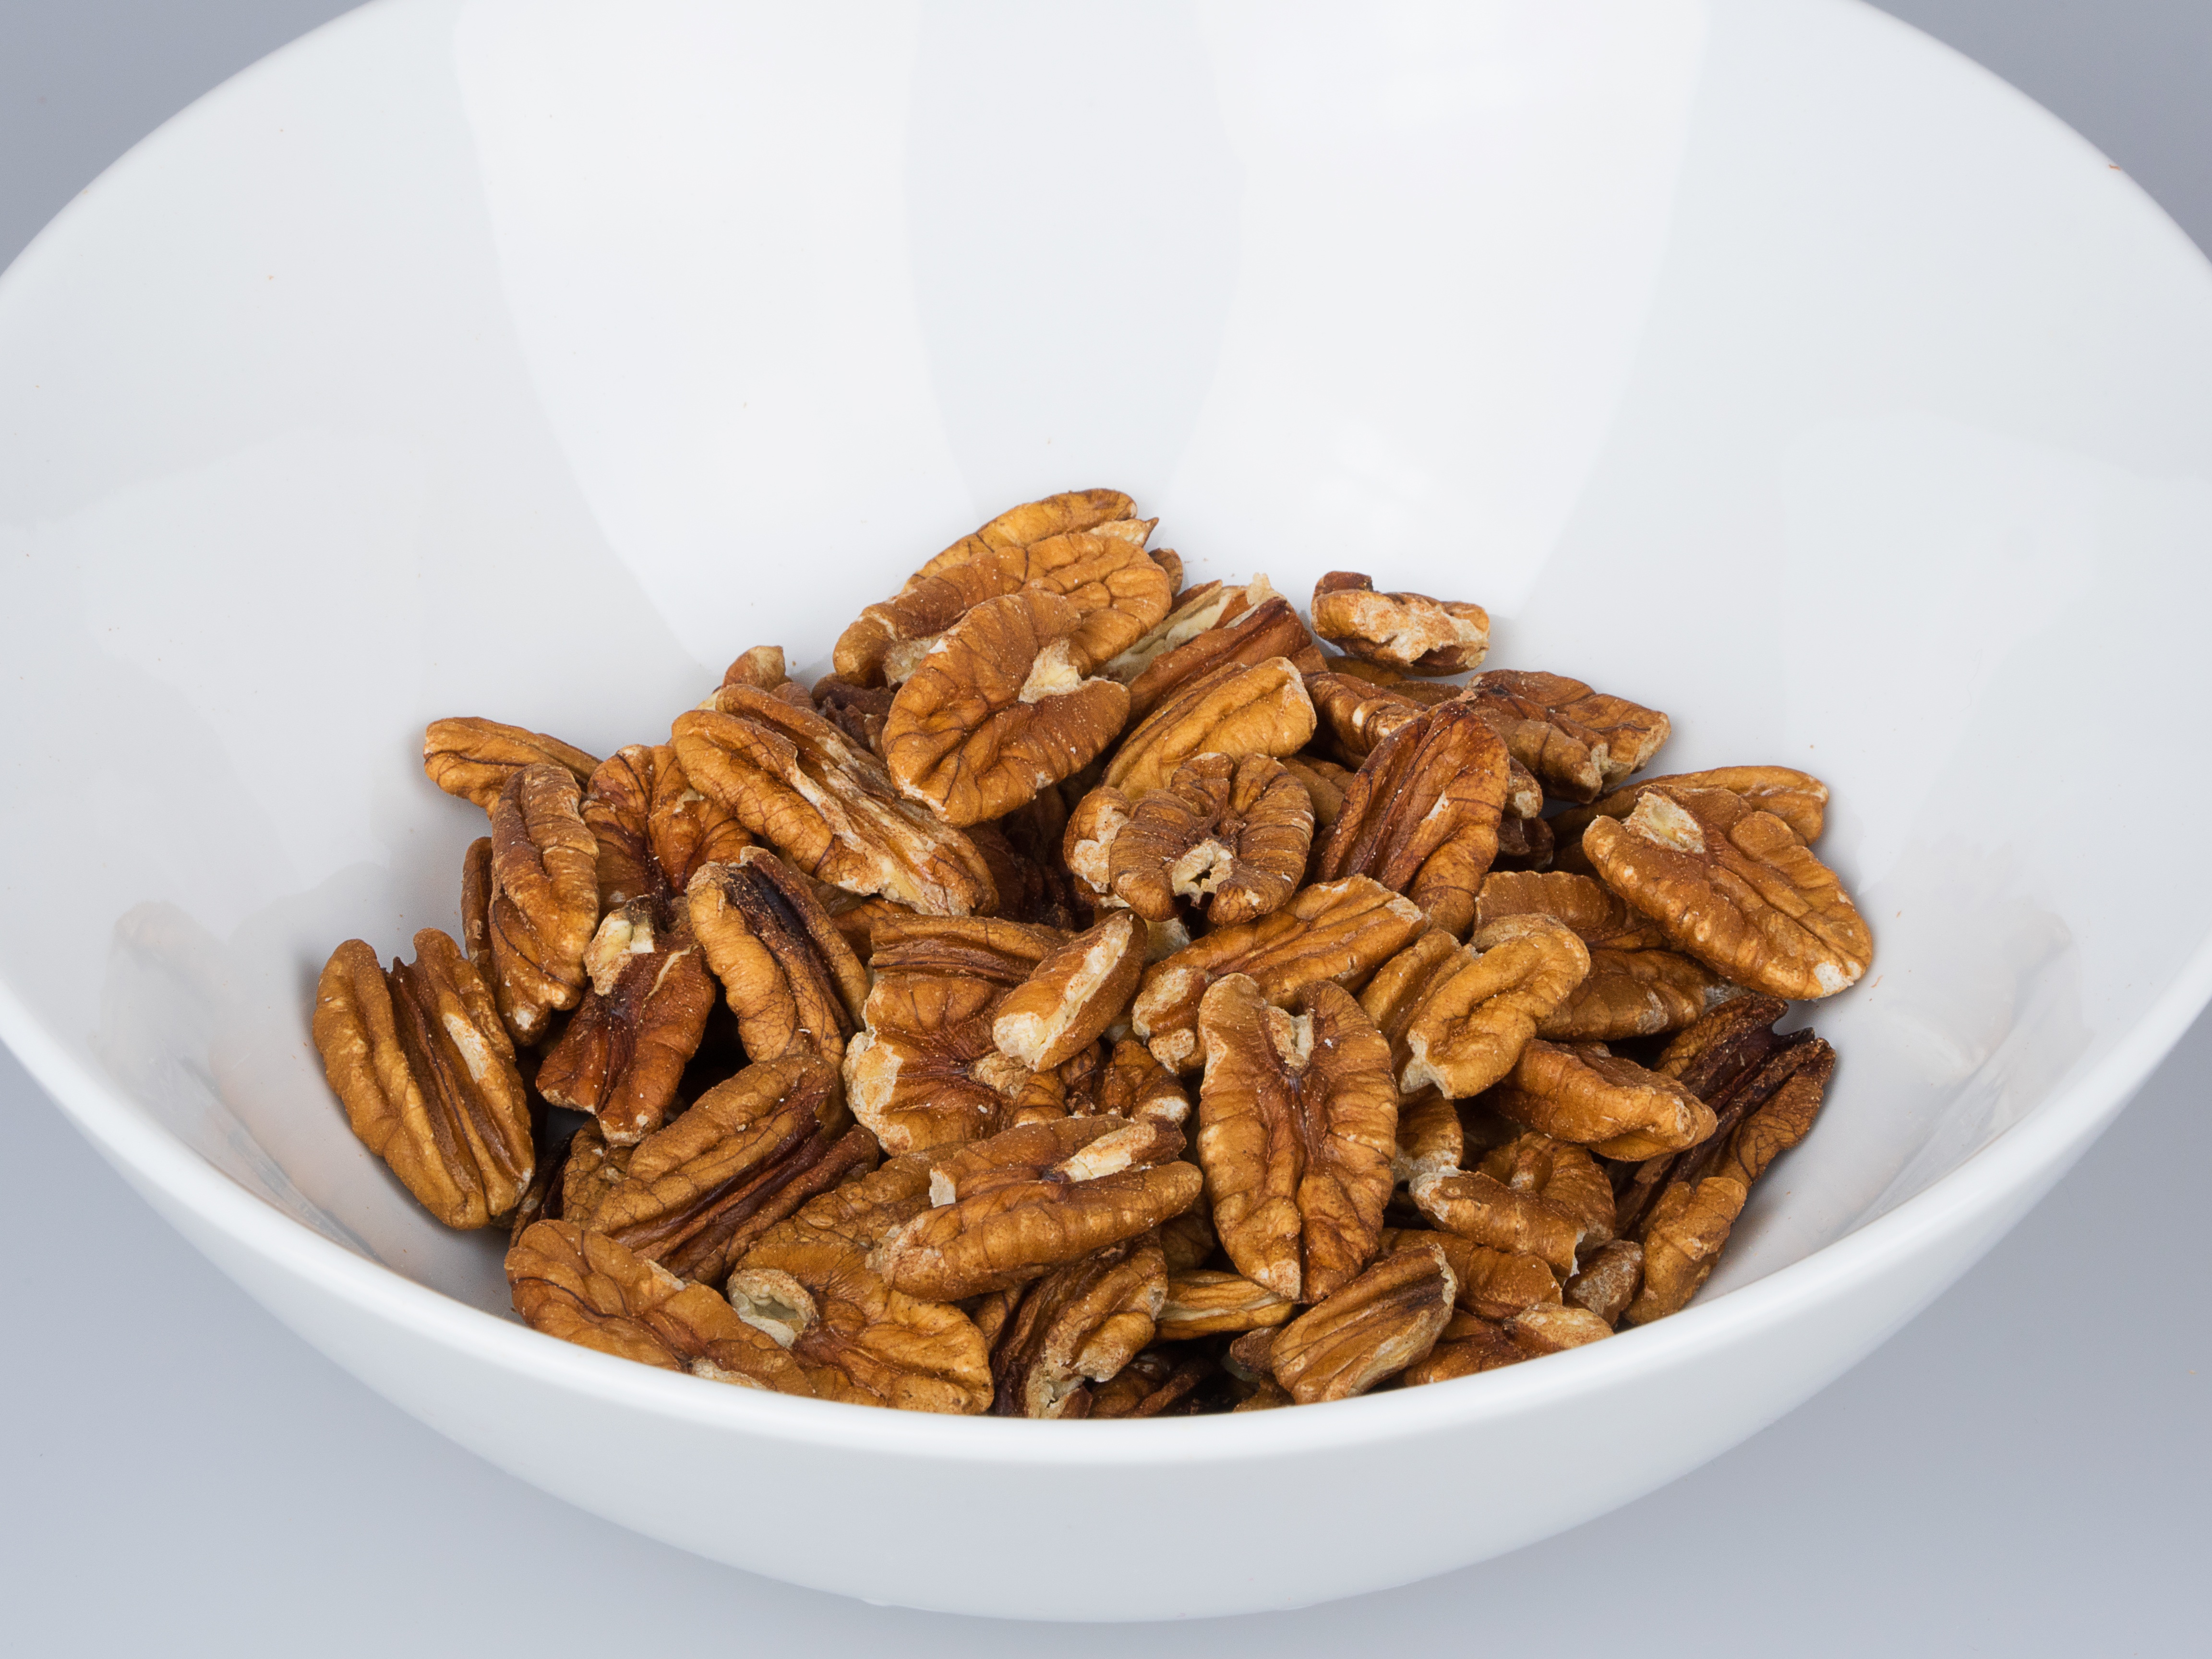 Have some pecans!